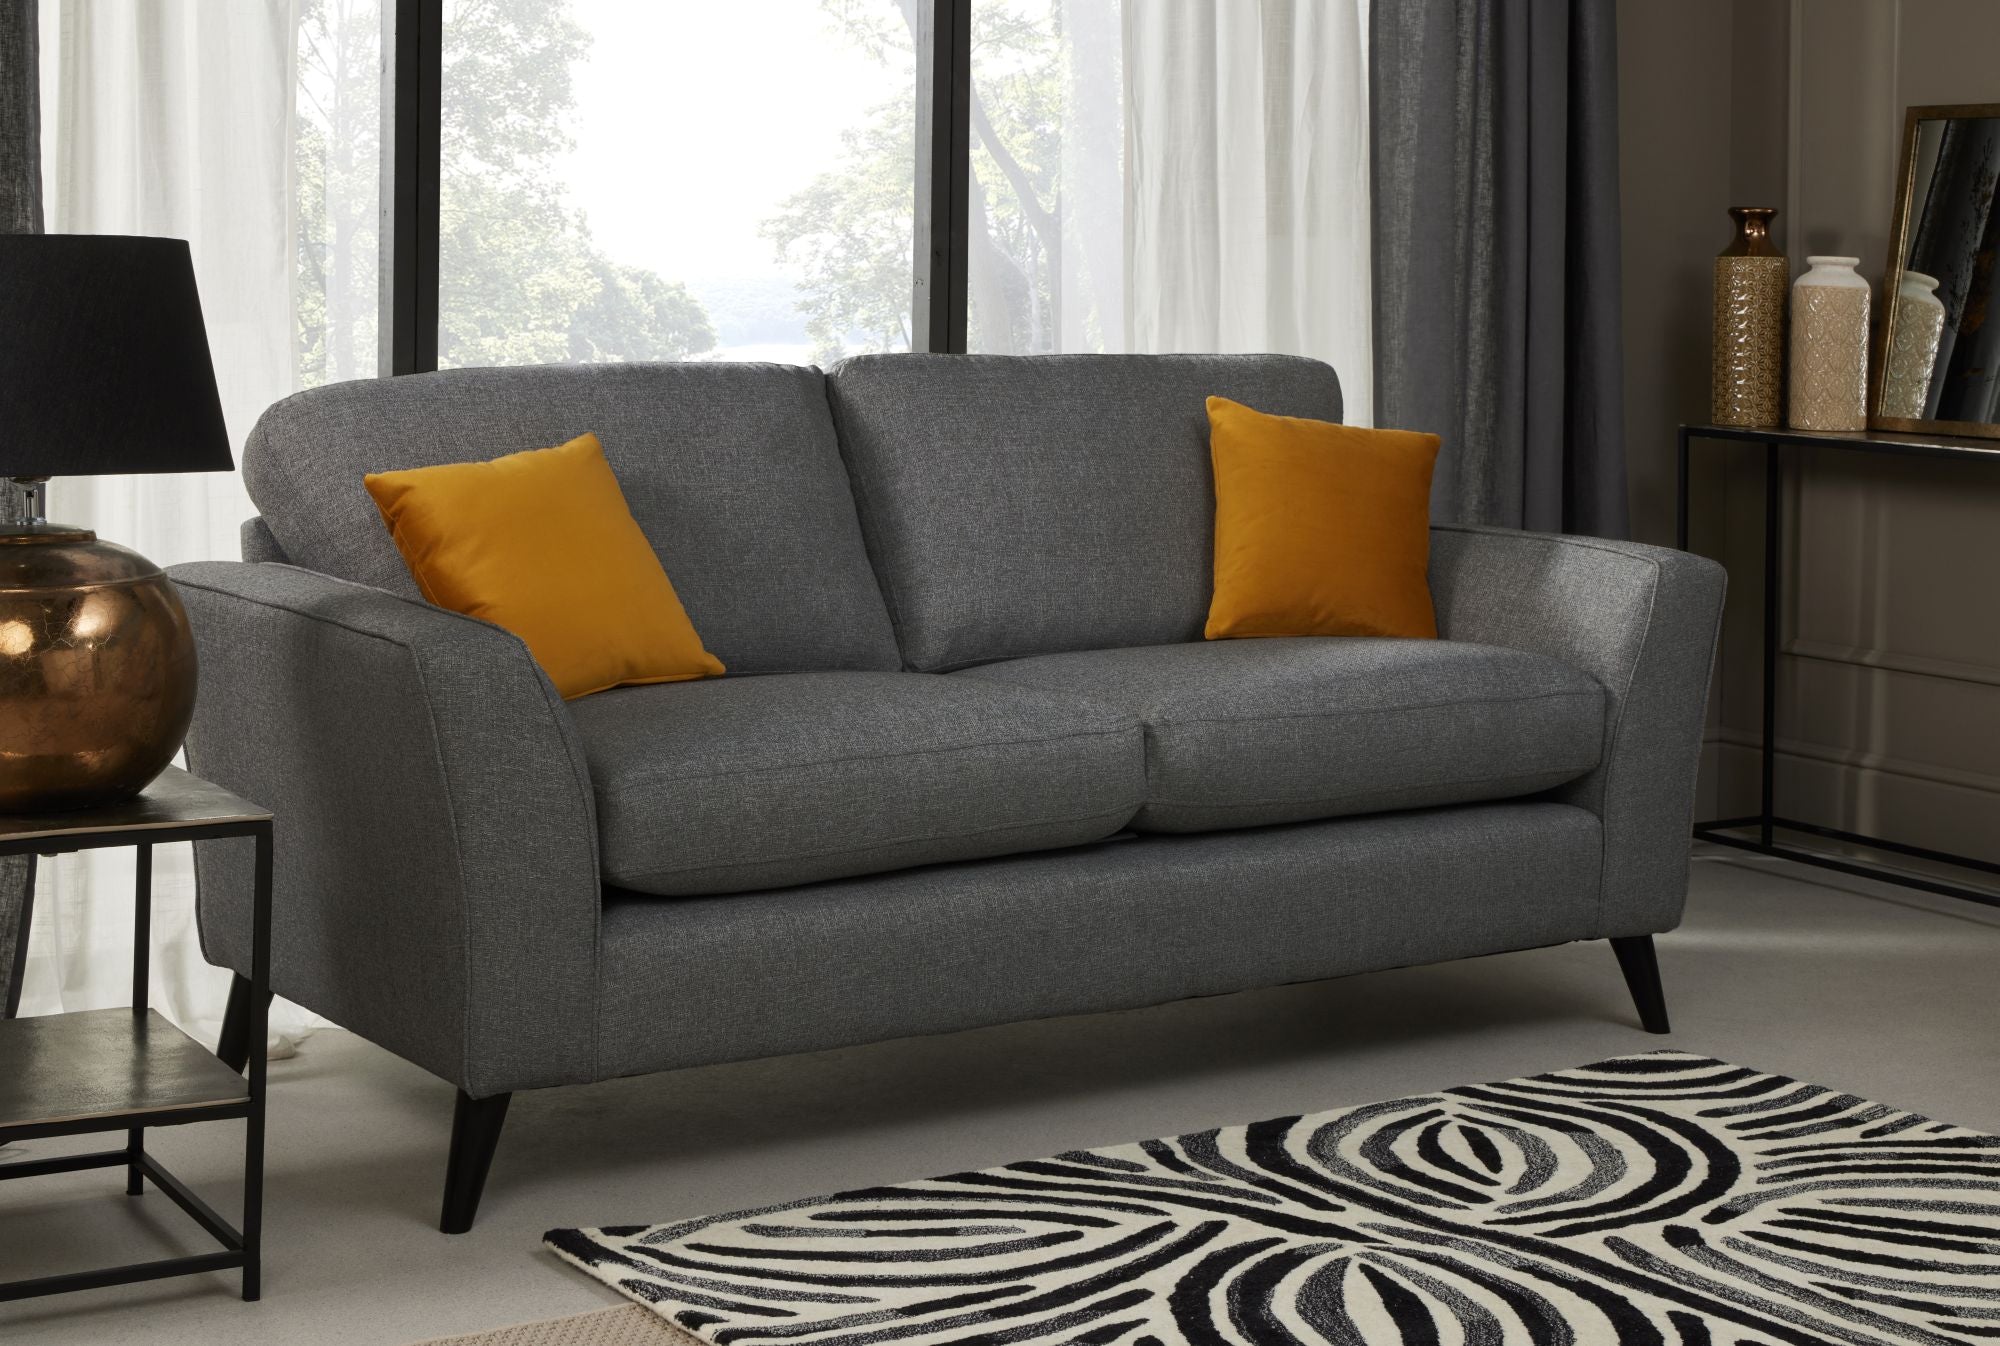 Libby 3 seater sofa in charcoal shown in a room setting